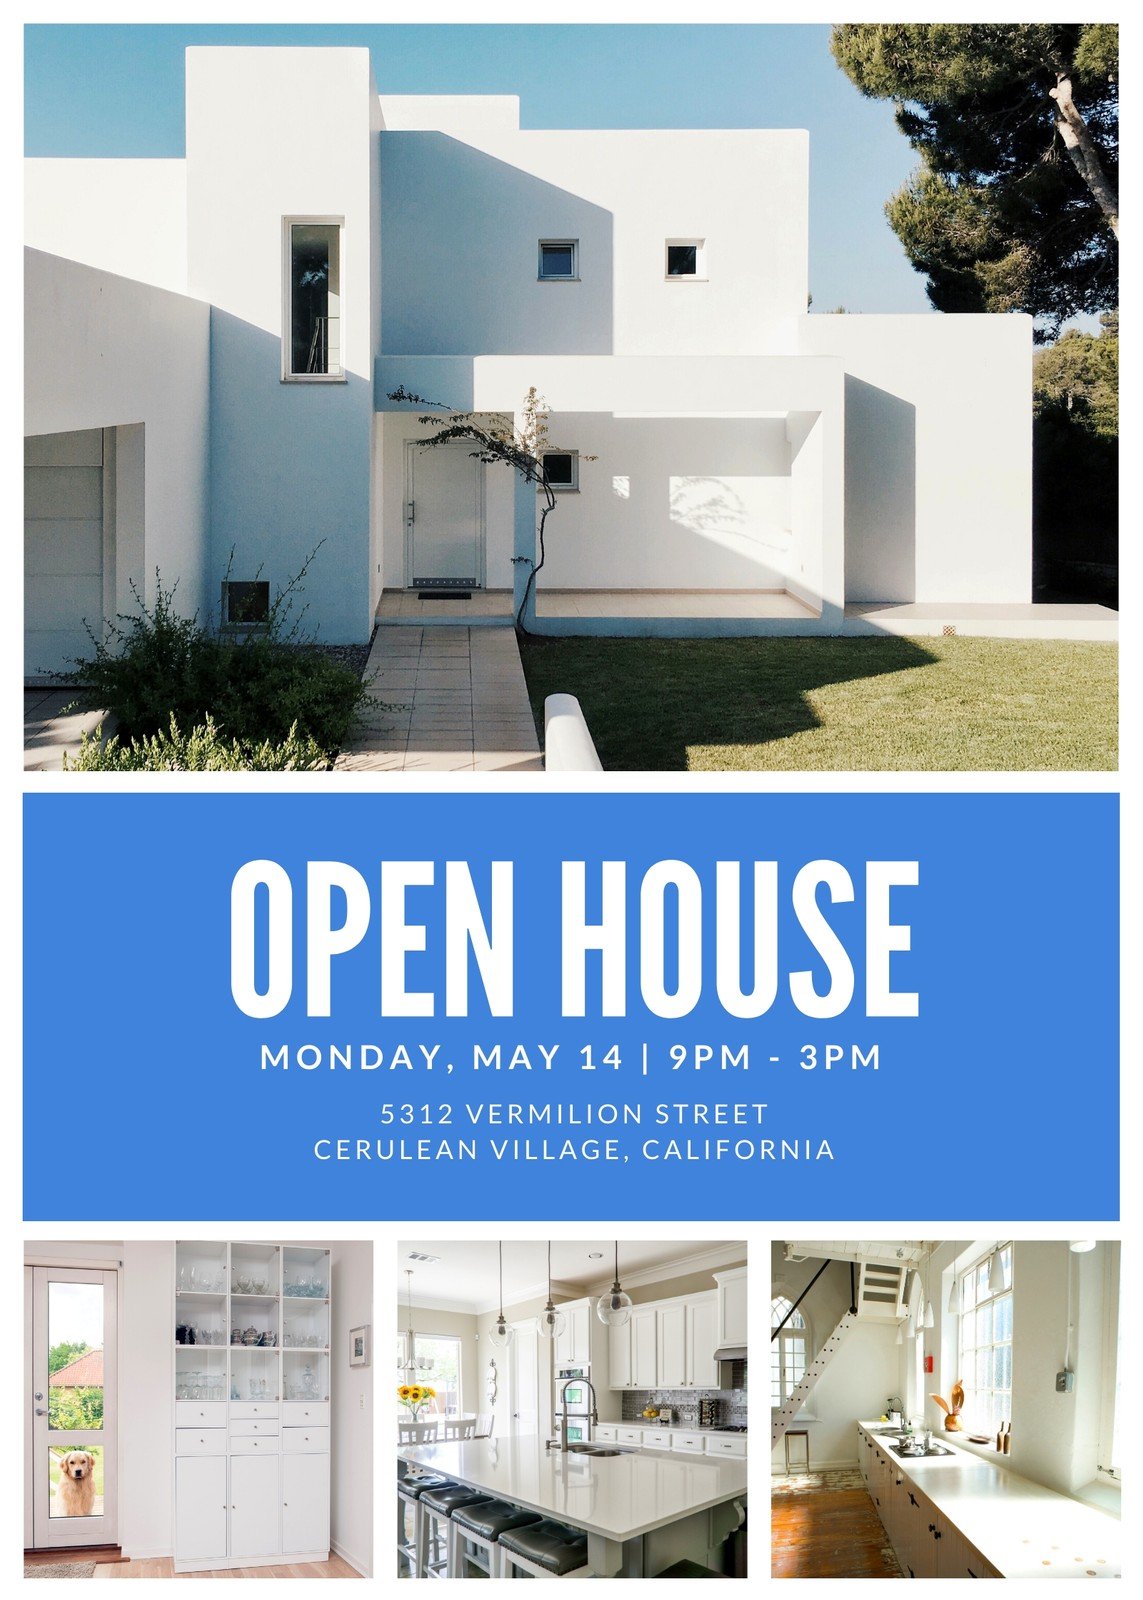 Open House Viewing Event Flyer - Templates by Canva Pertaining To Open House Flyer Template Free